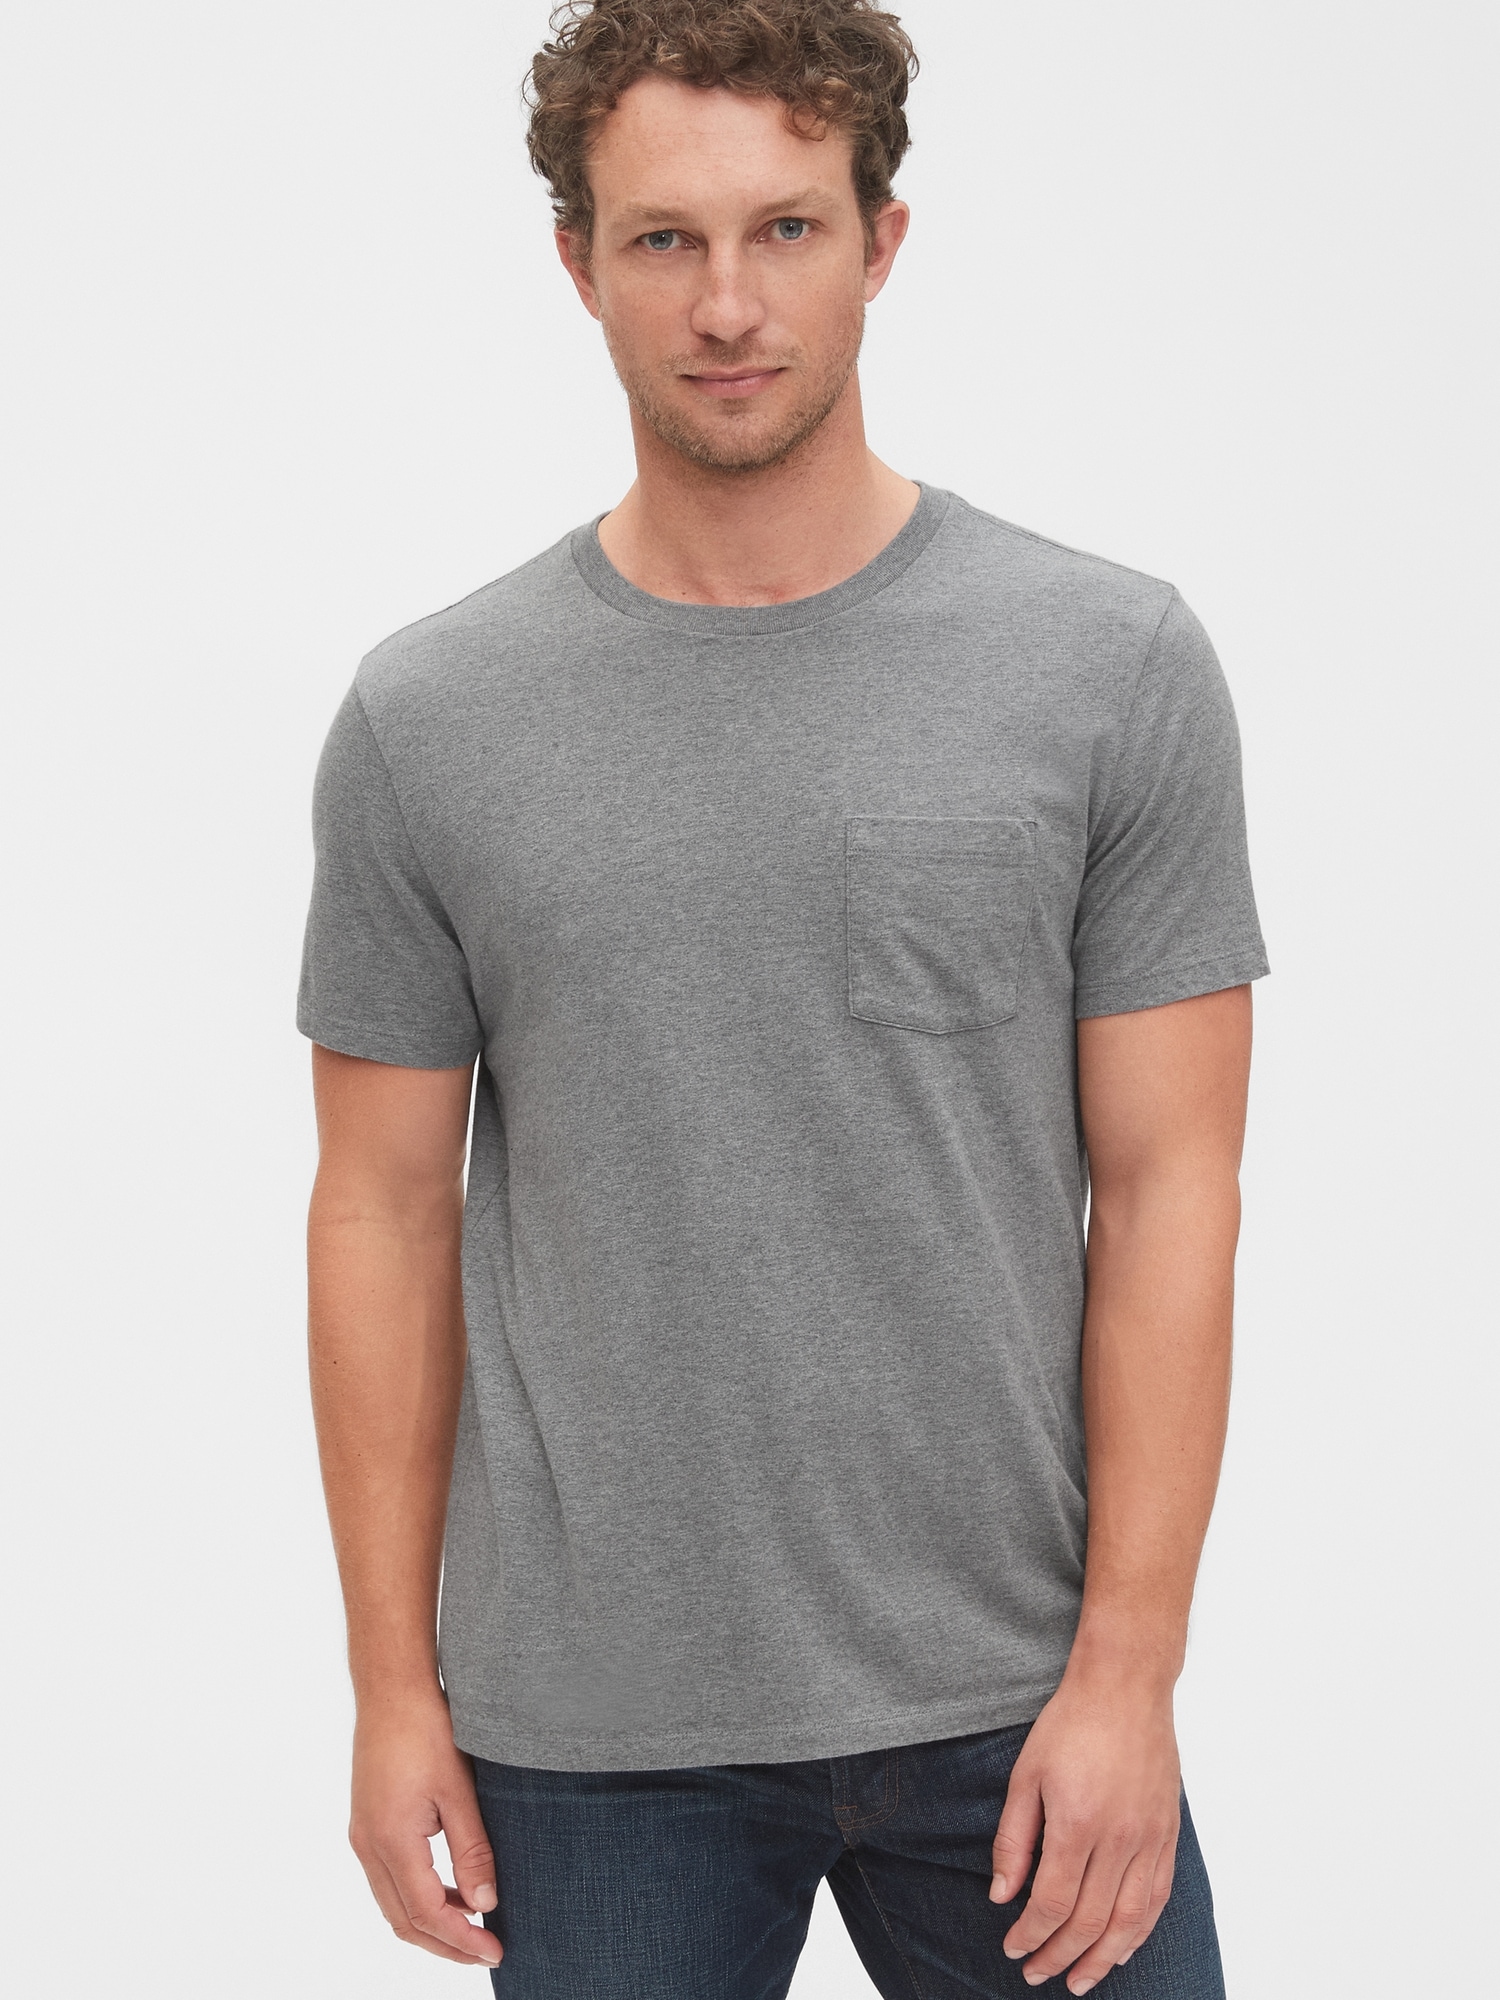 specification Country Strawberry Pocket T-Shirt | Gap